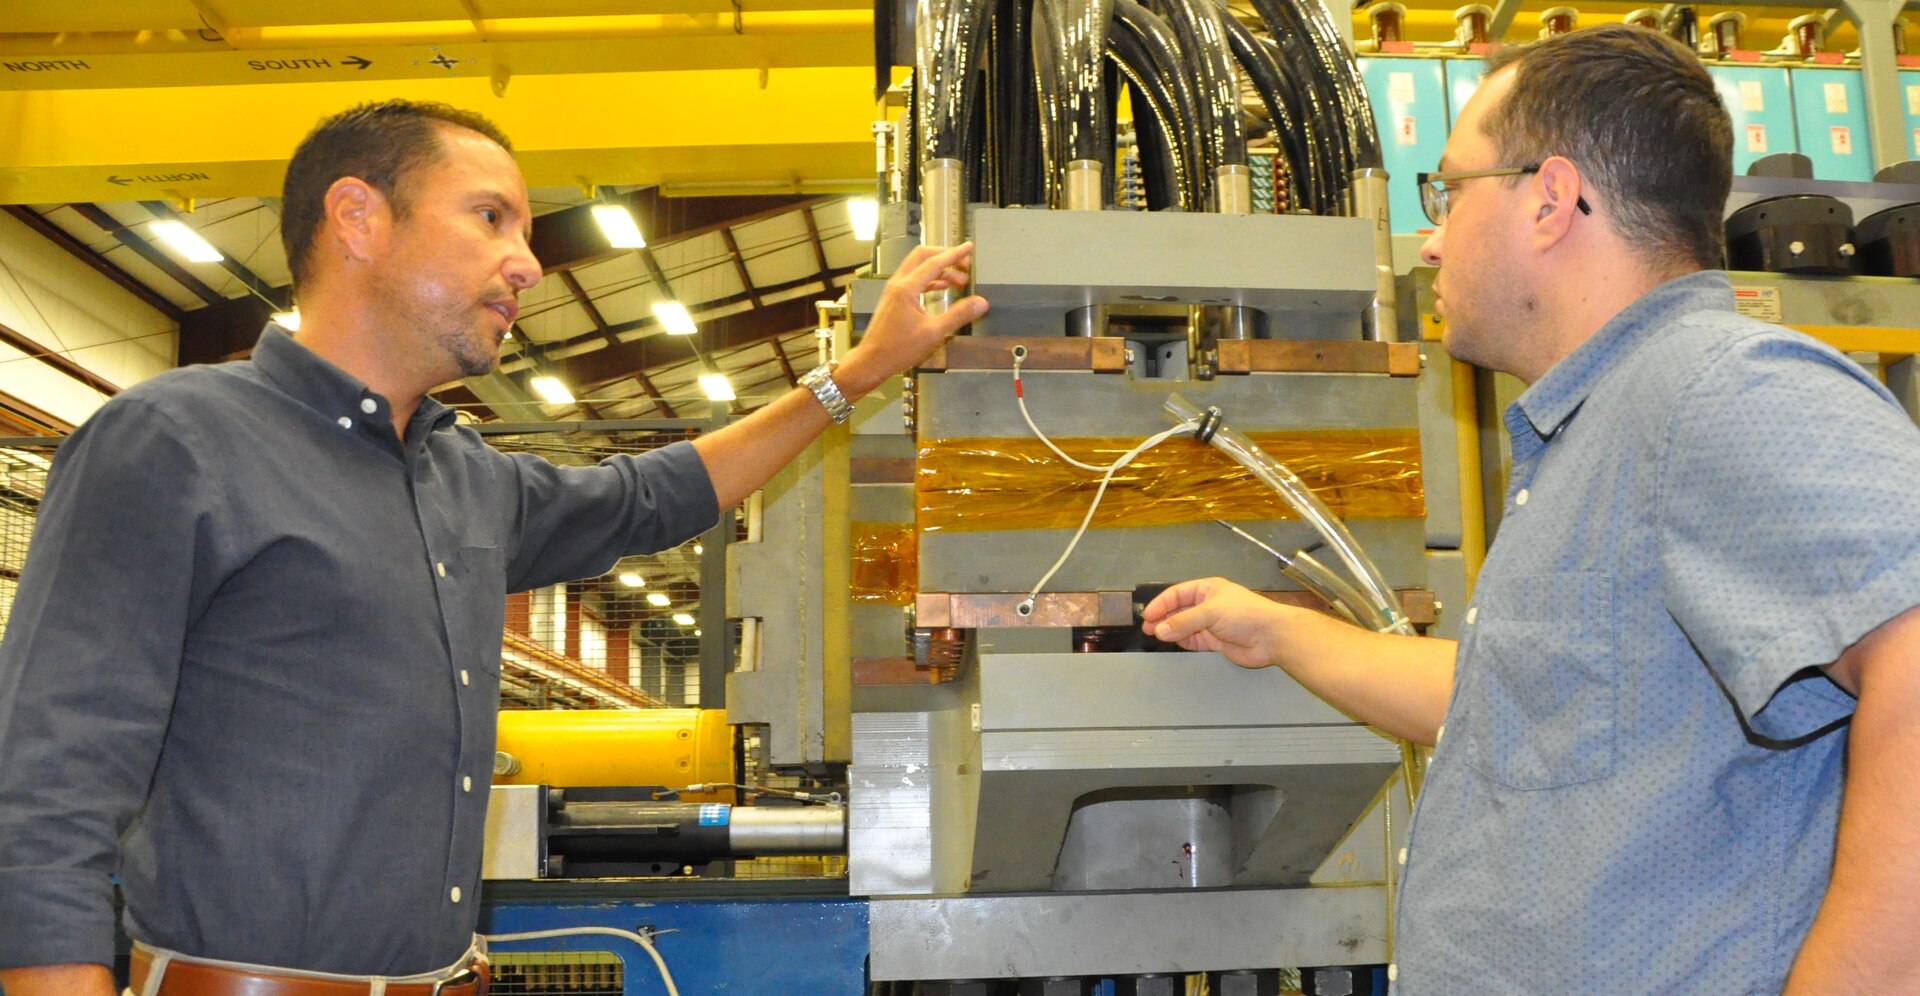 IMAGE: DAHLGREN, Va. (Sept. 5, 2019) - Moises Iglesias – lead systems engineer for the electromagnetic railgun weapon system at Naval Surface Warfare Center Dahlgren Division (NSWCDD) – discusses railgun design considerations with his colleague, Pierre Avila, NSWCDD computer scientist.  “A leader helps the organization, the team, and its members become famous - providing the tools, training, development, recognition and opportunities to deliver products that will help the organization and its members grow professionally and personally while establishing the organization’s National Subject Matter Expertise and Recognition,” said Iglesias, an avid runner and native of Carolina, Puerto Rico.